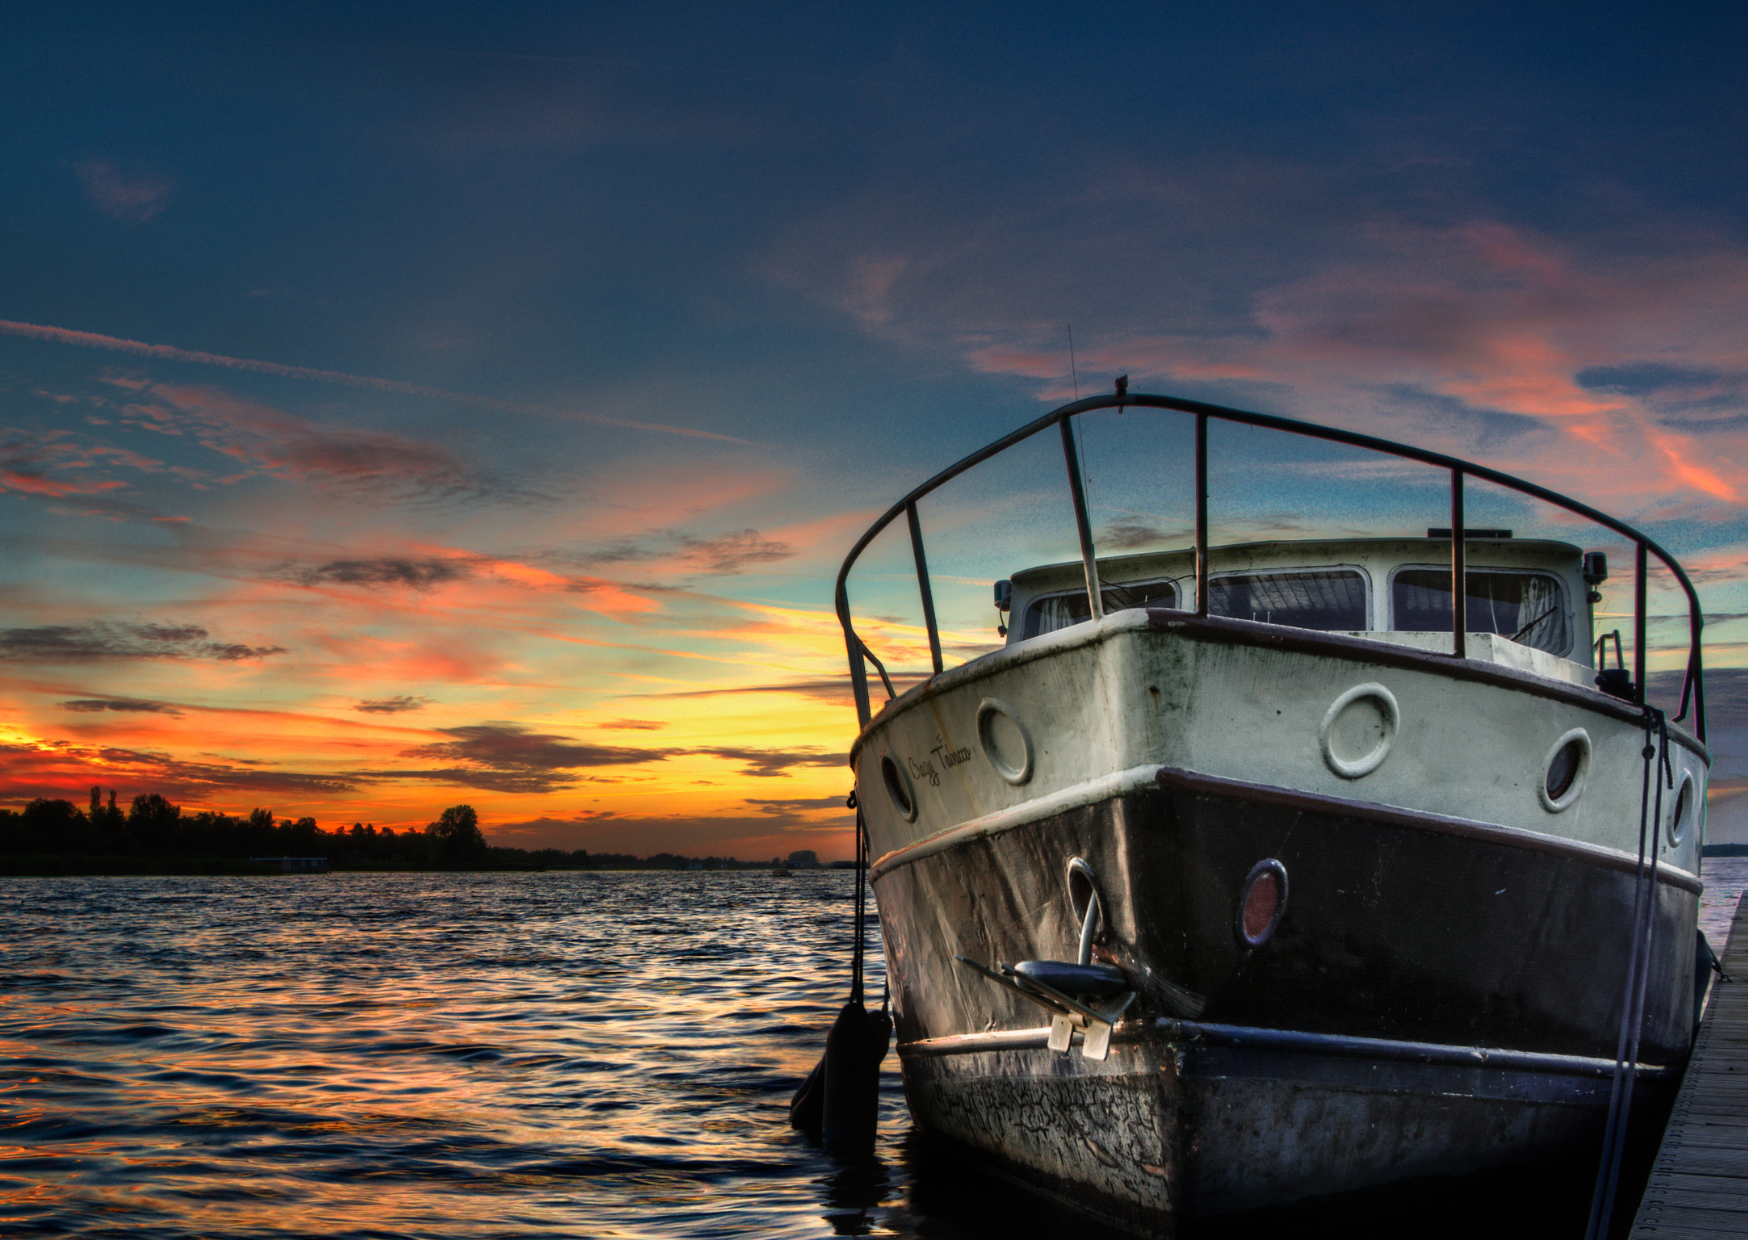 A fishing boat at the dock at sunset